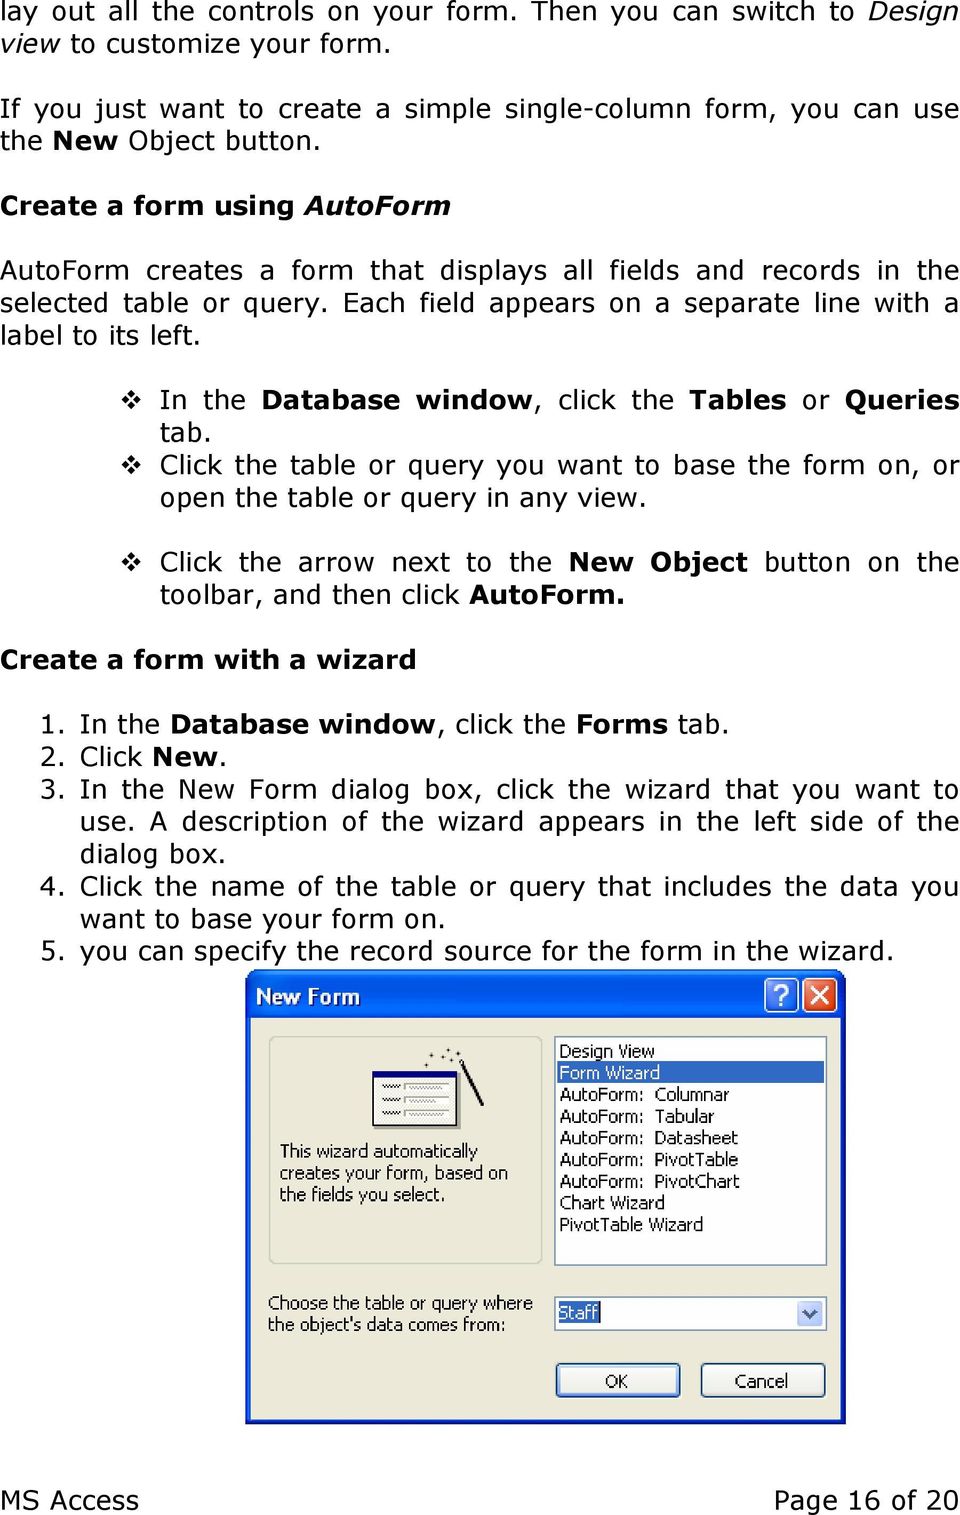 In the Database window, click the Tables or Queries tab. Click the table or query you want to base the form on, or open the table or query in any view.